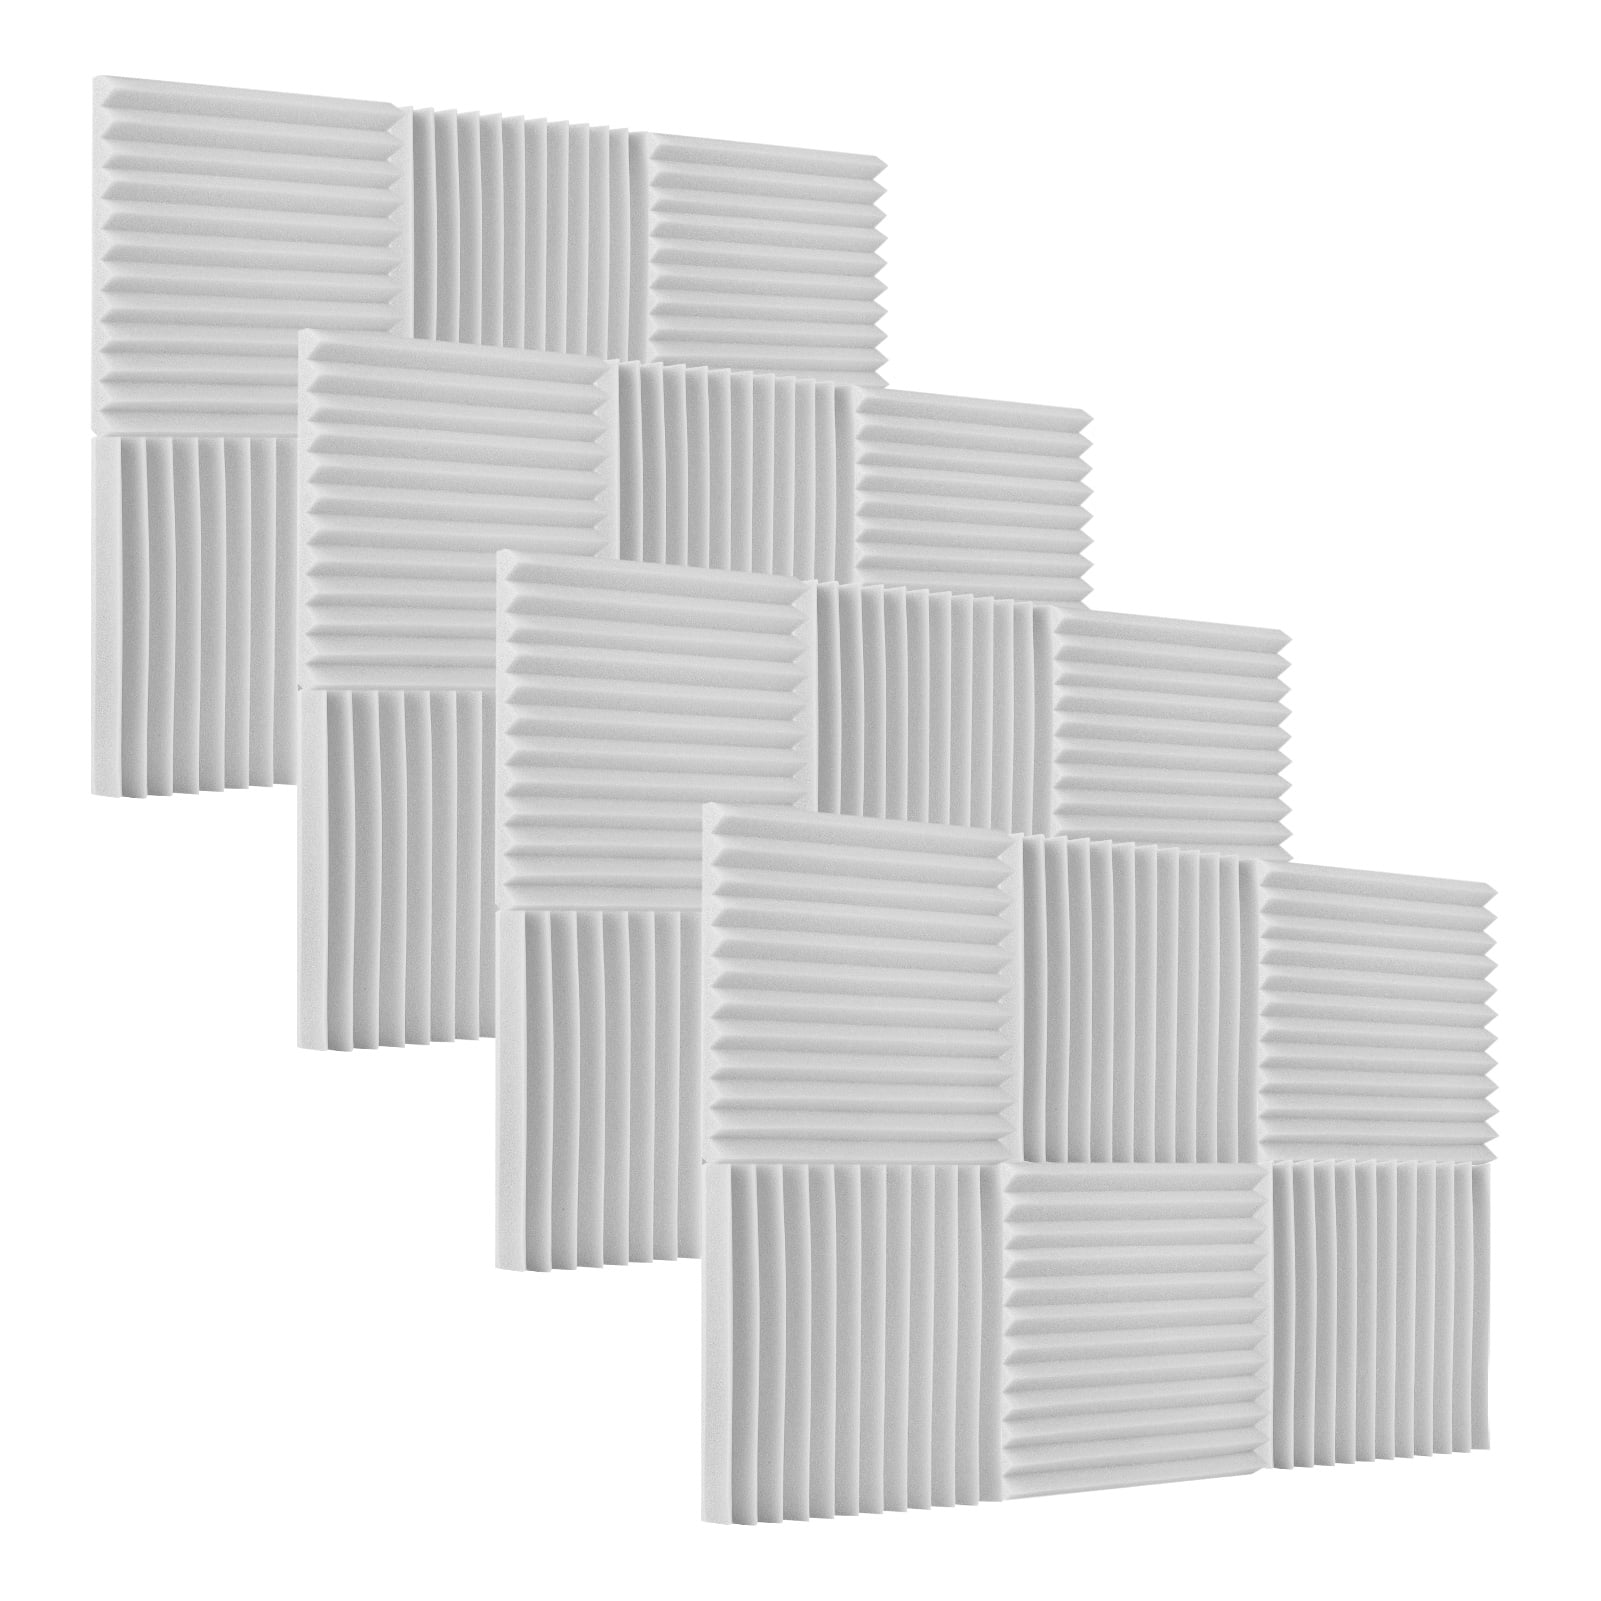 BXI Double Noise Insulation Soundproofing Foam - 39.4 X 13.4 X 1 Inches Egg  Crate Sound Proof Acoustic Foam Panels - Sound Dampening Panels for HVAC